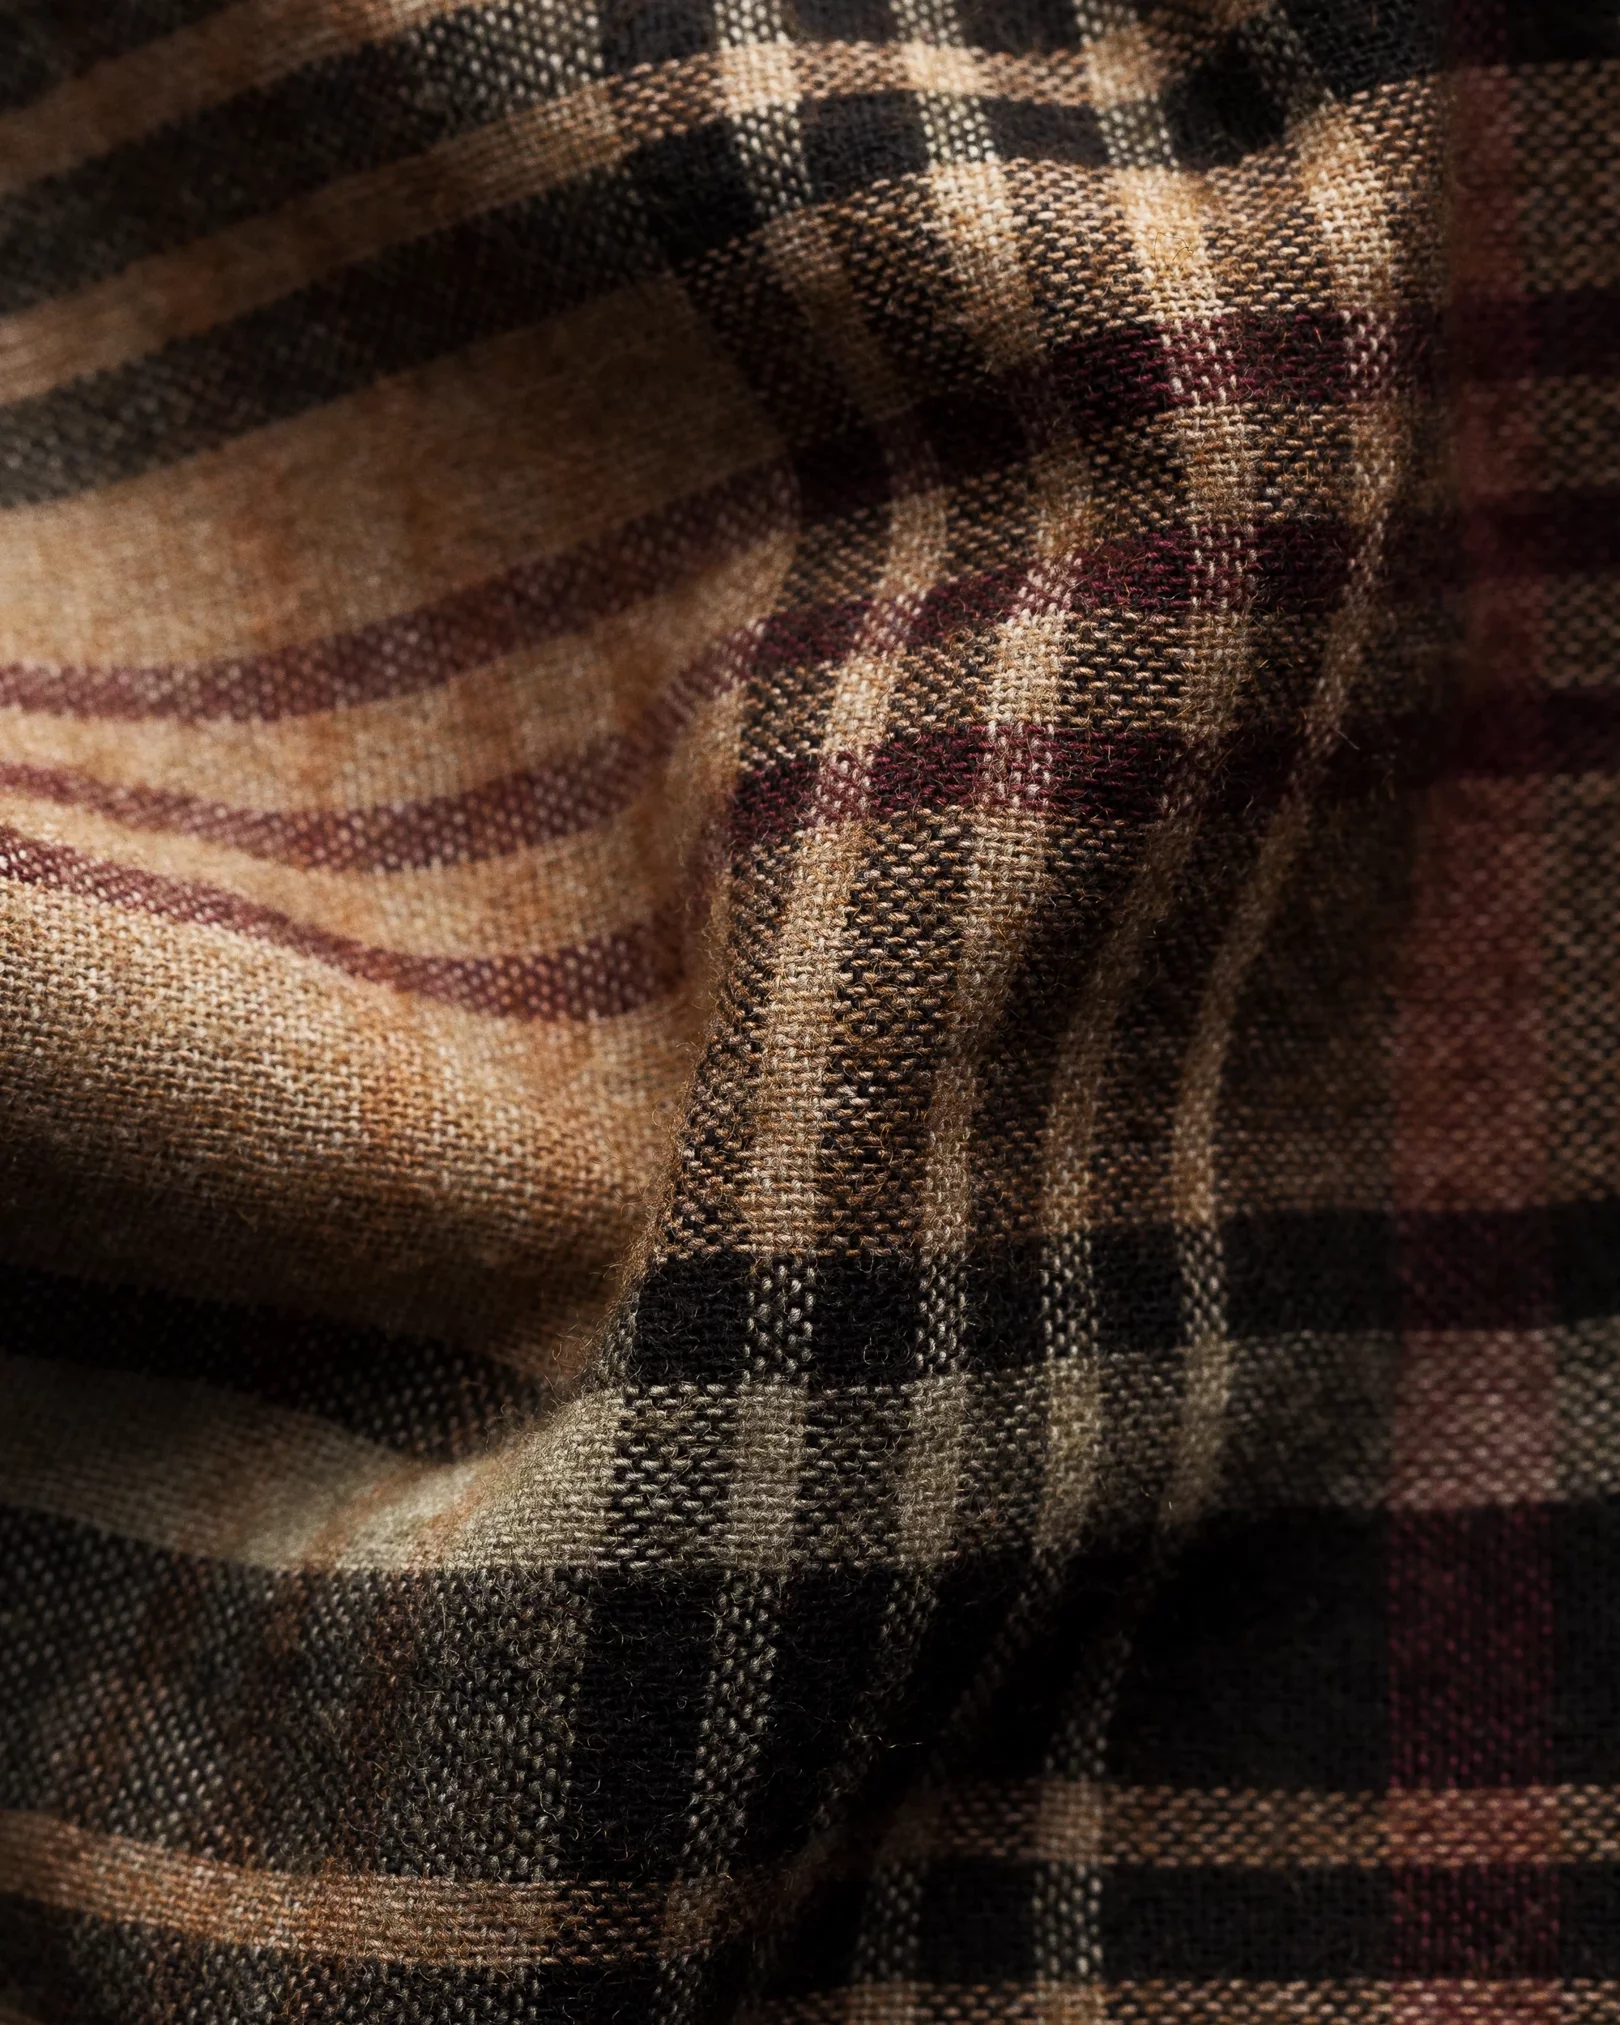 What is Tartan Patterns - Easy Guide to Tartan Fabric